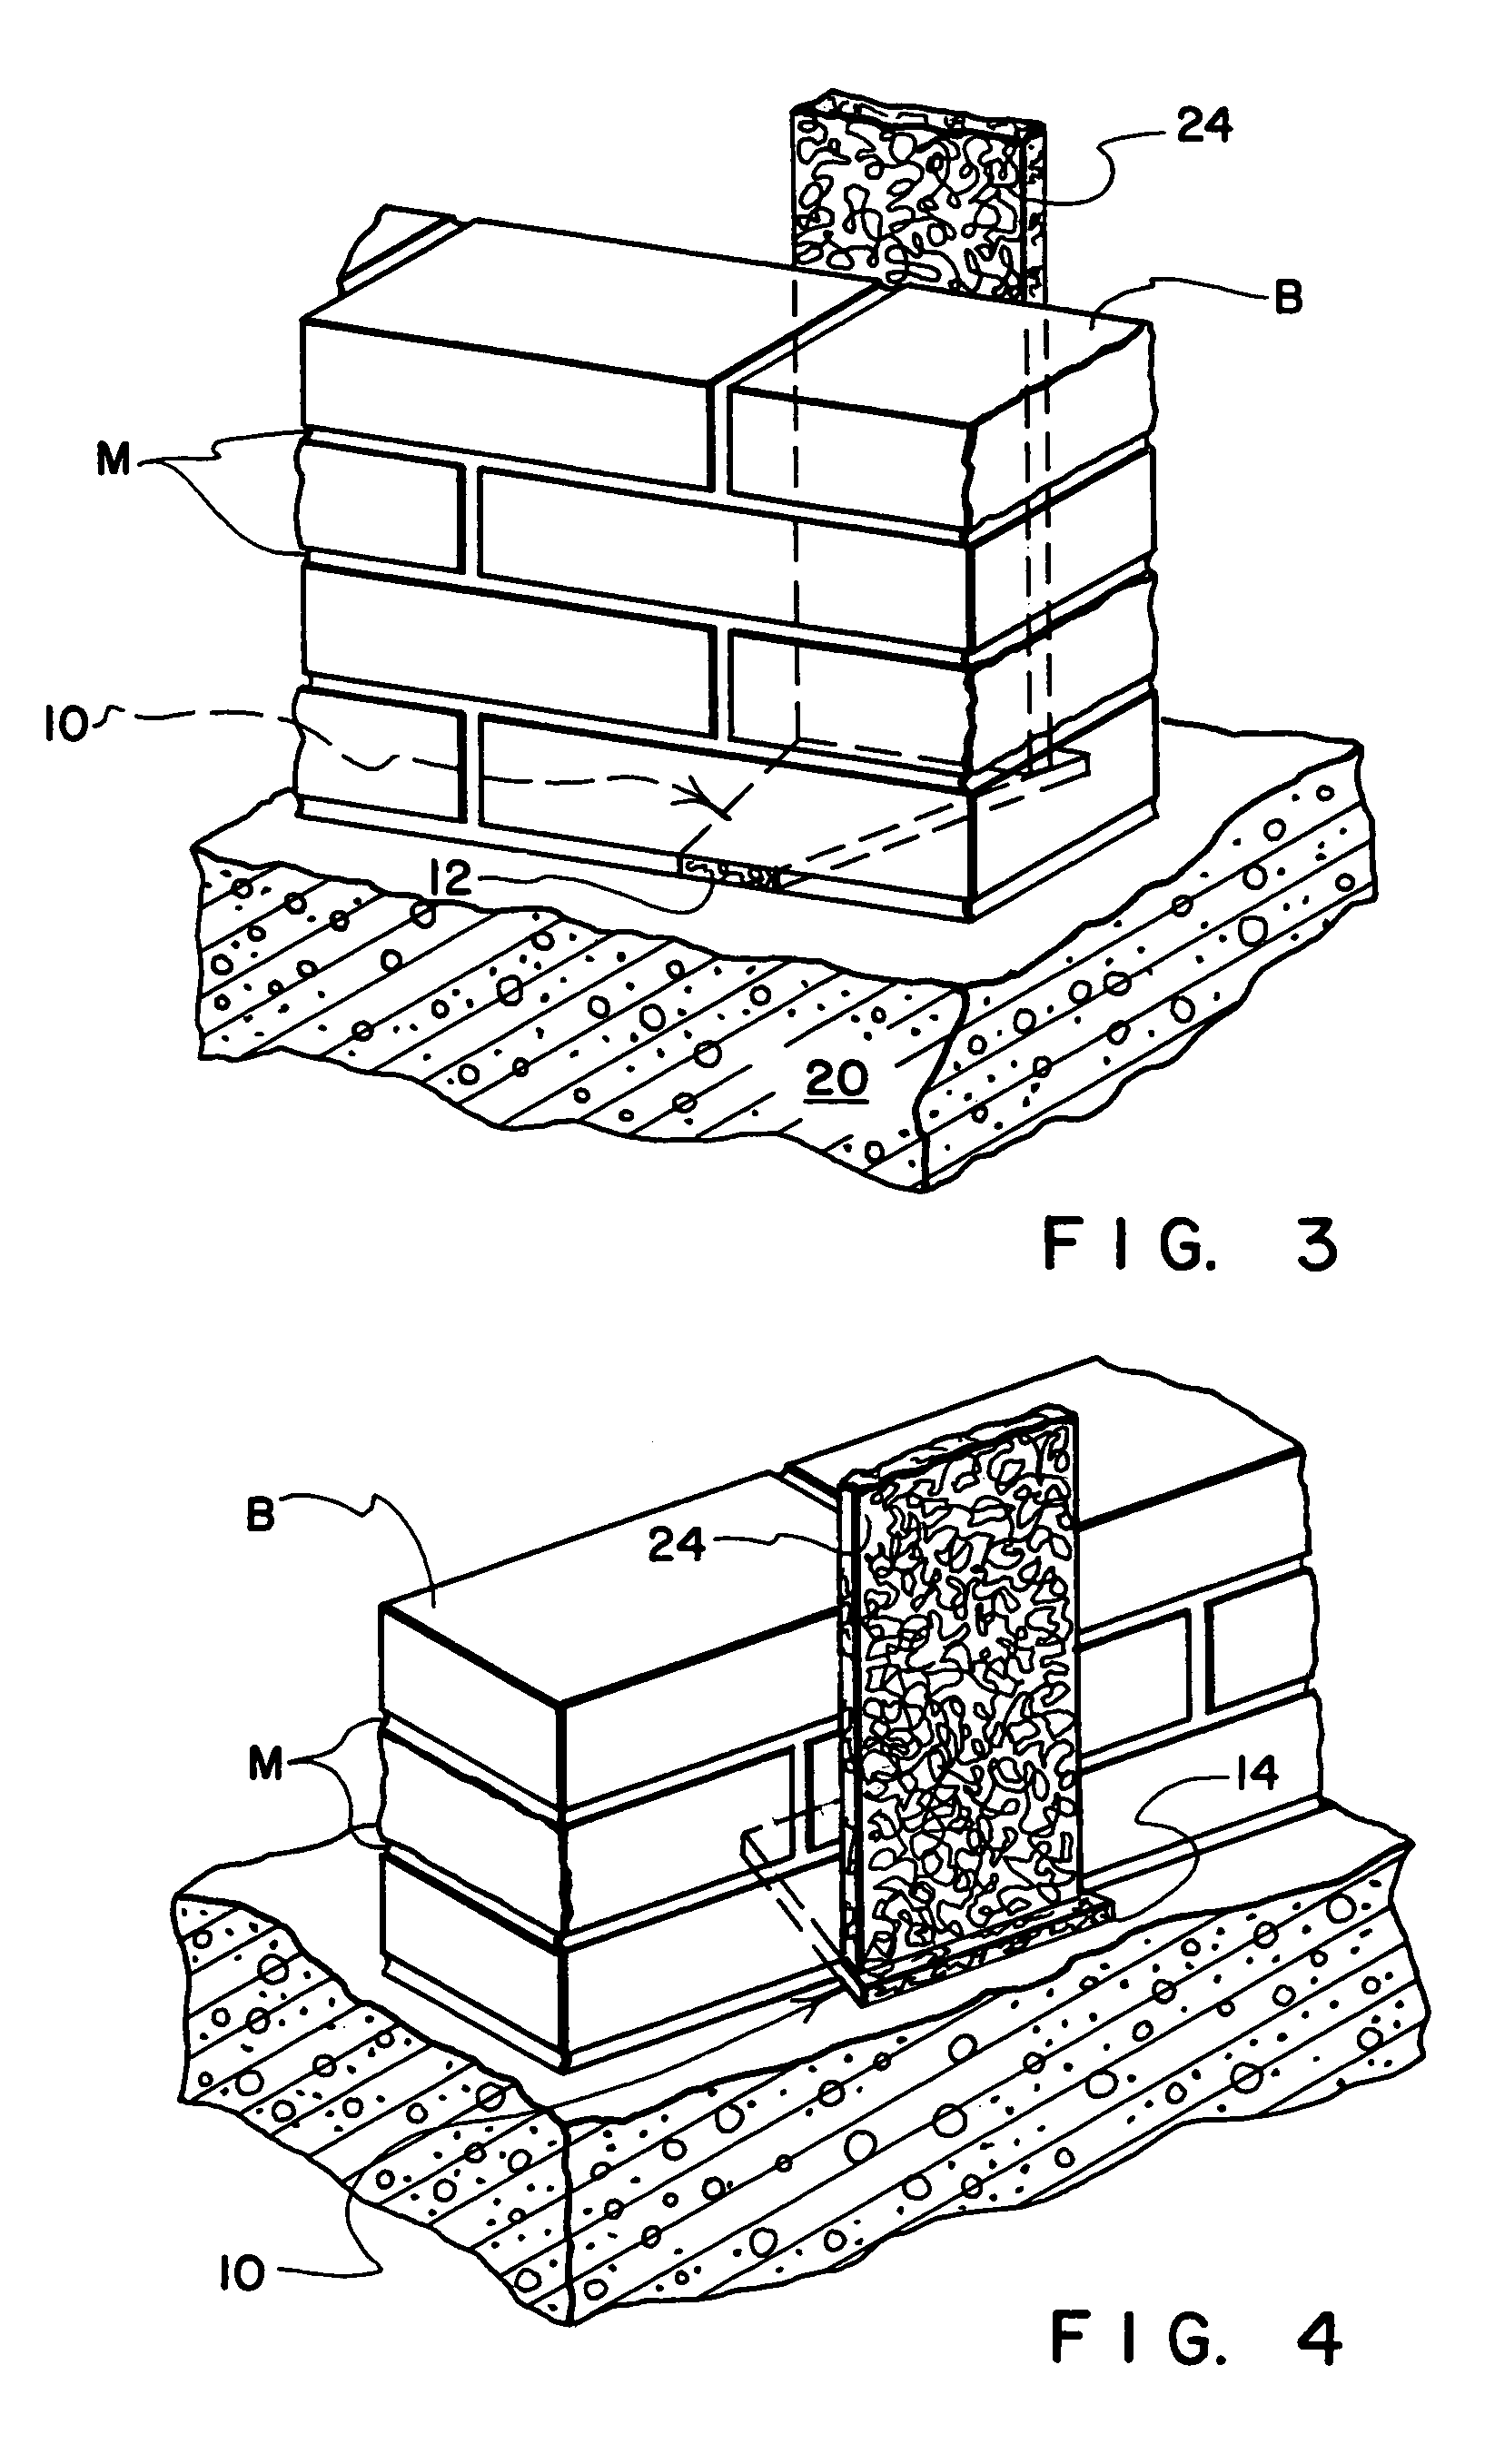 Weep venting system for masonry walls